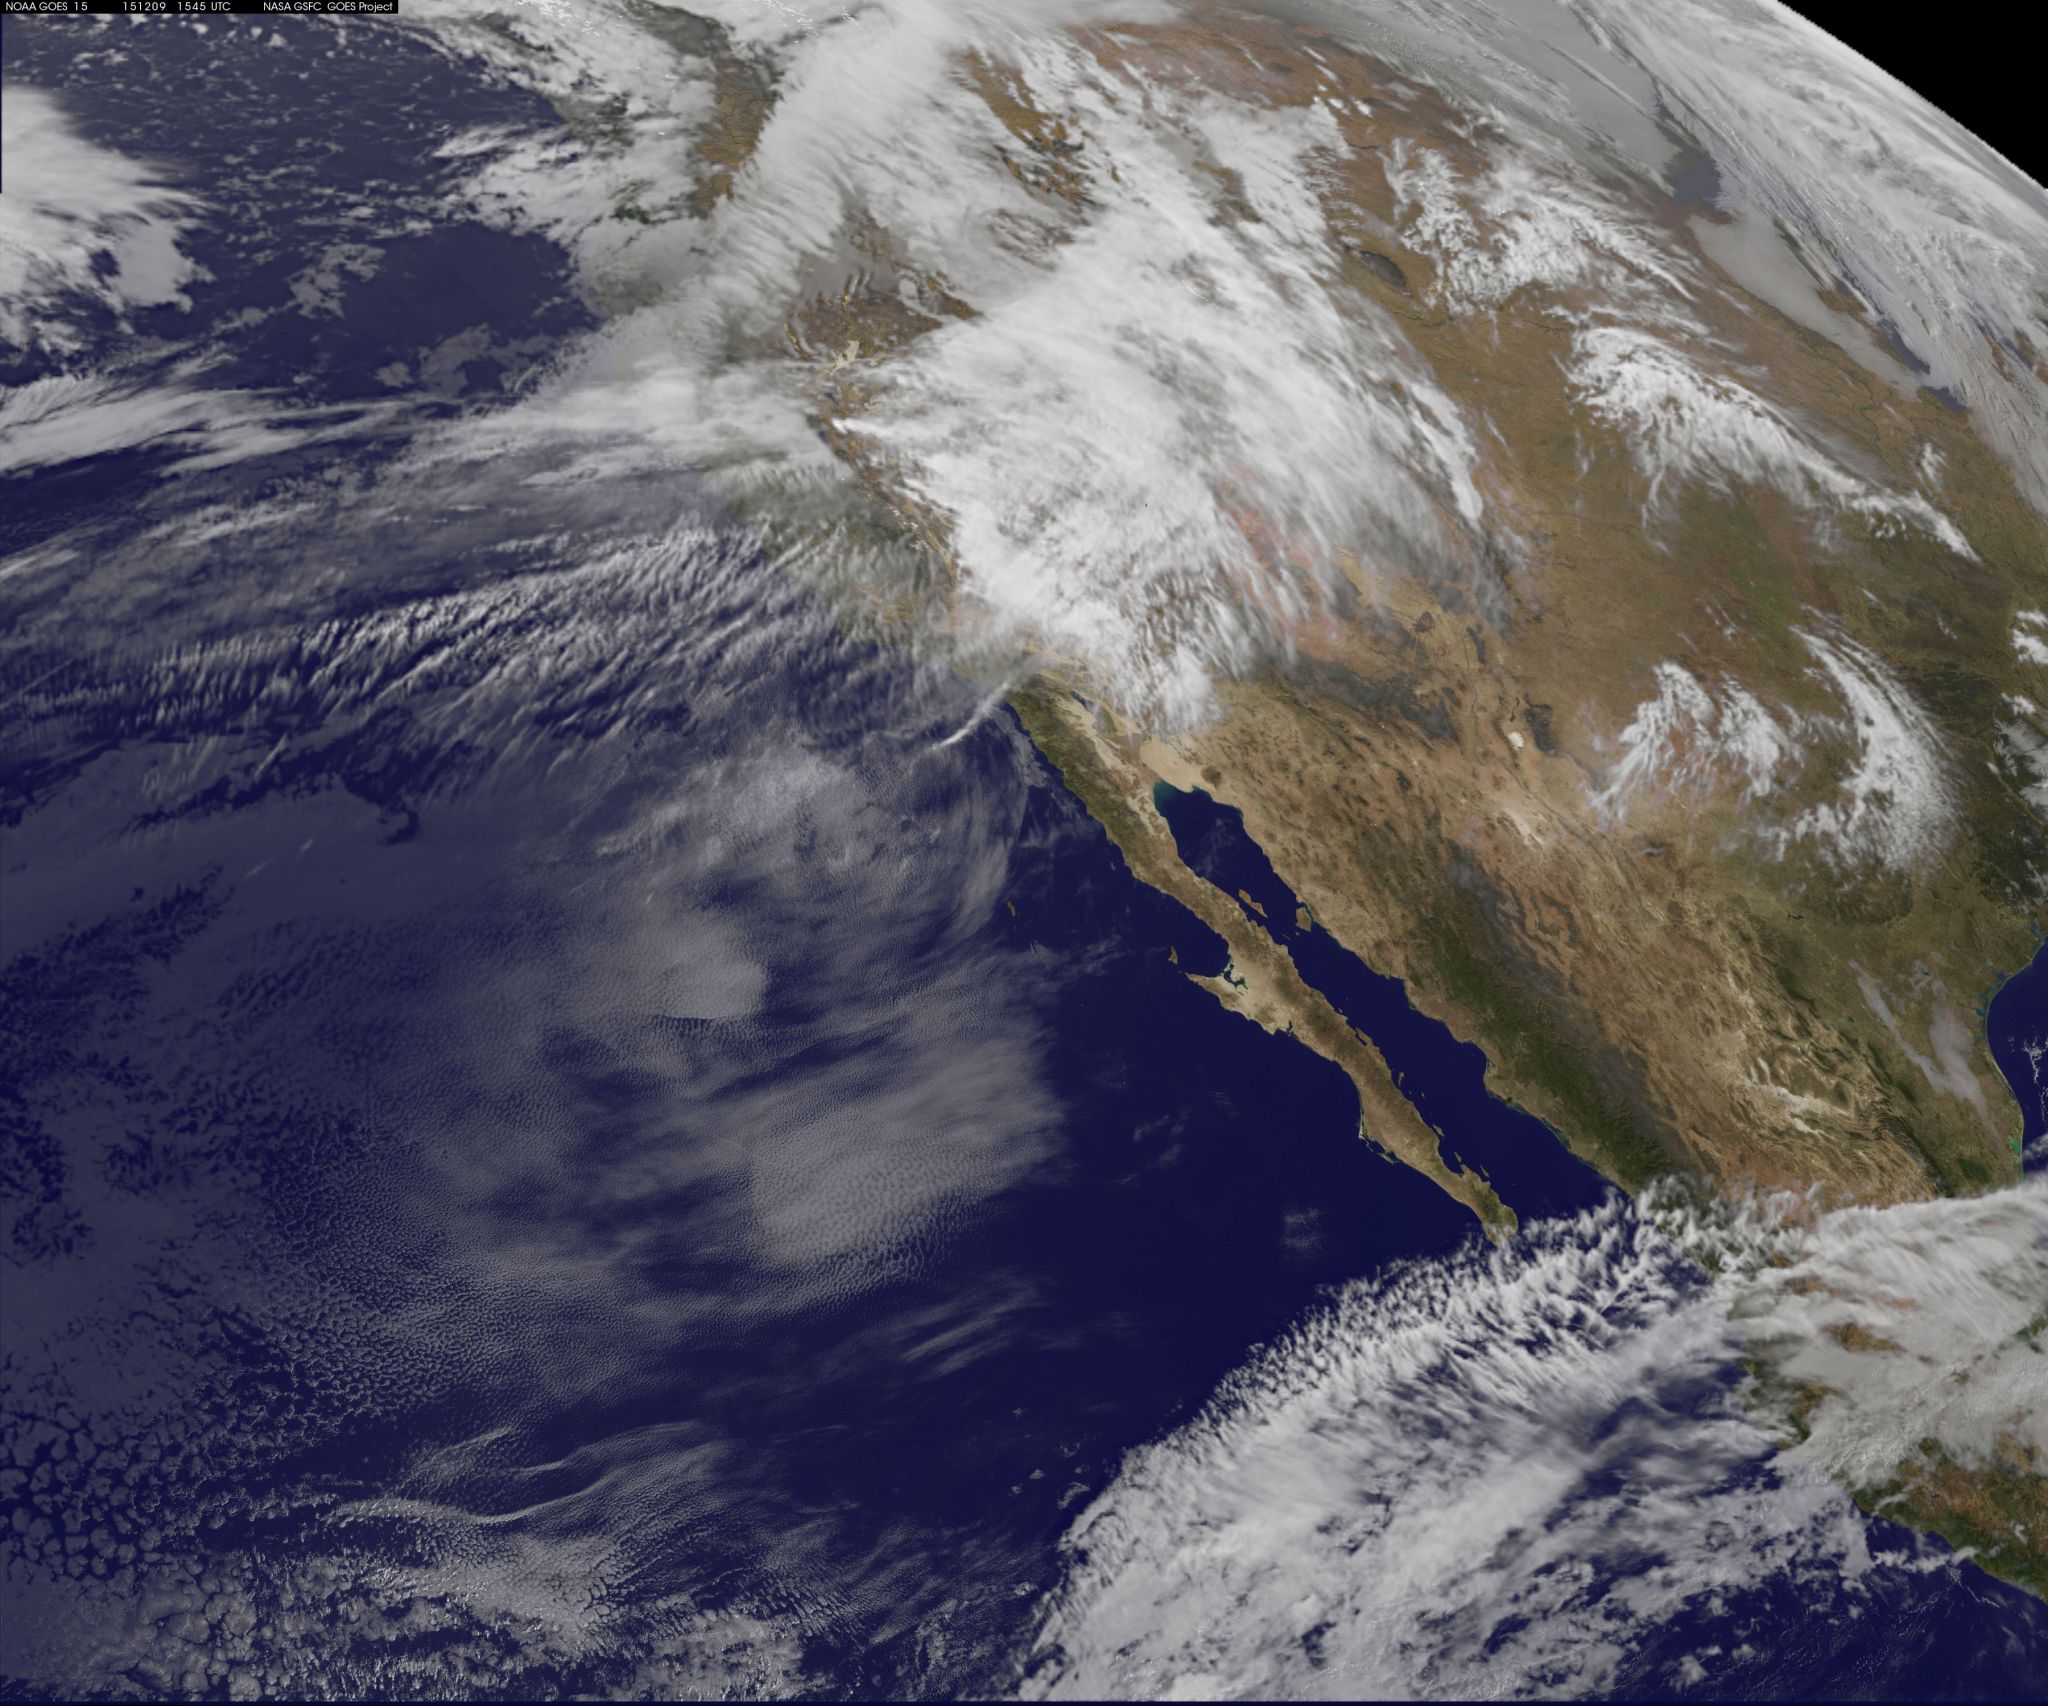 NOAA's GOES-15 on Dec. 9 at 10:45 a.m. EST shows the series of storms that have been affecting the Pacific NW.